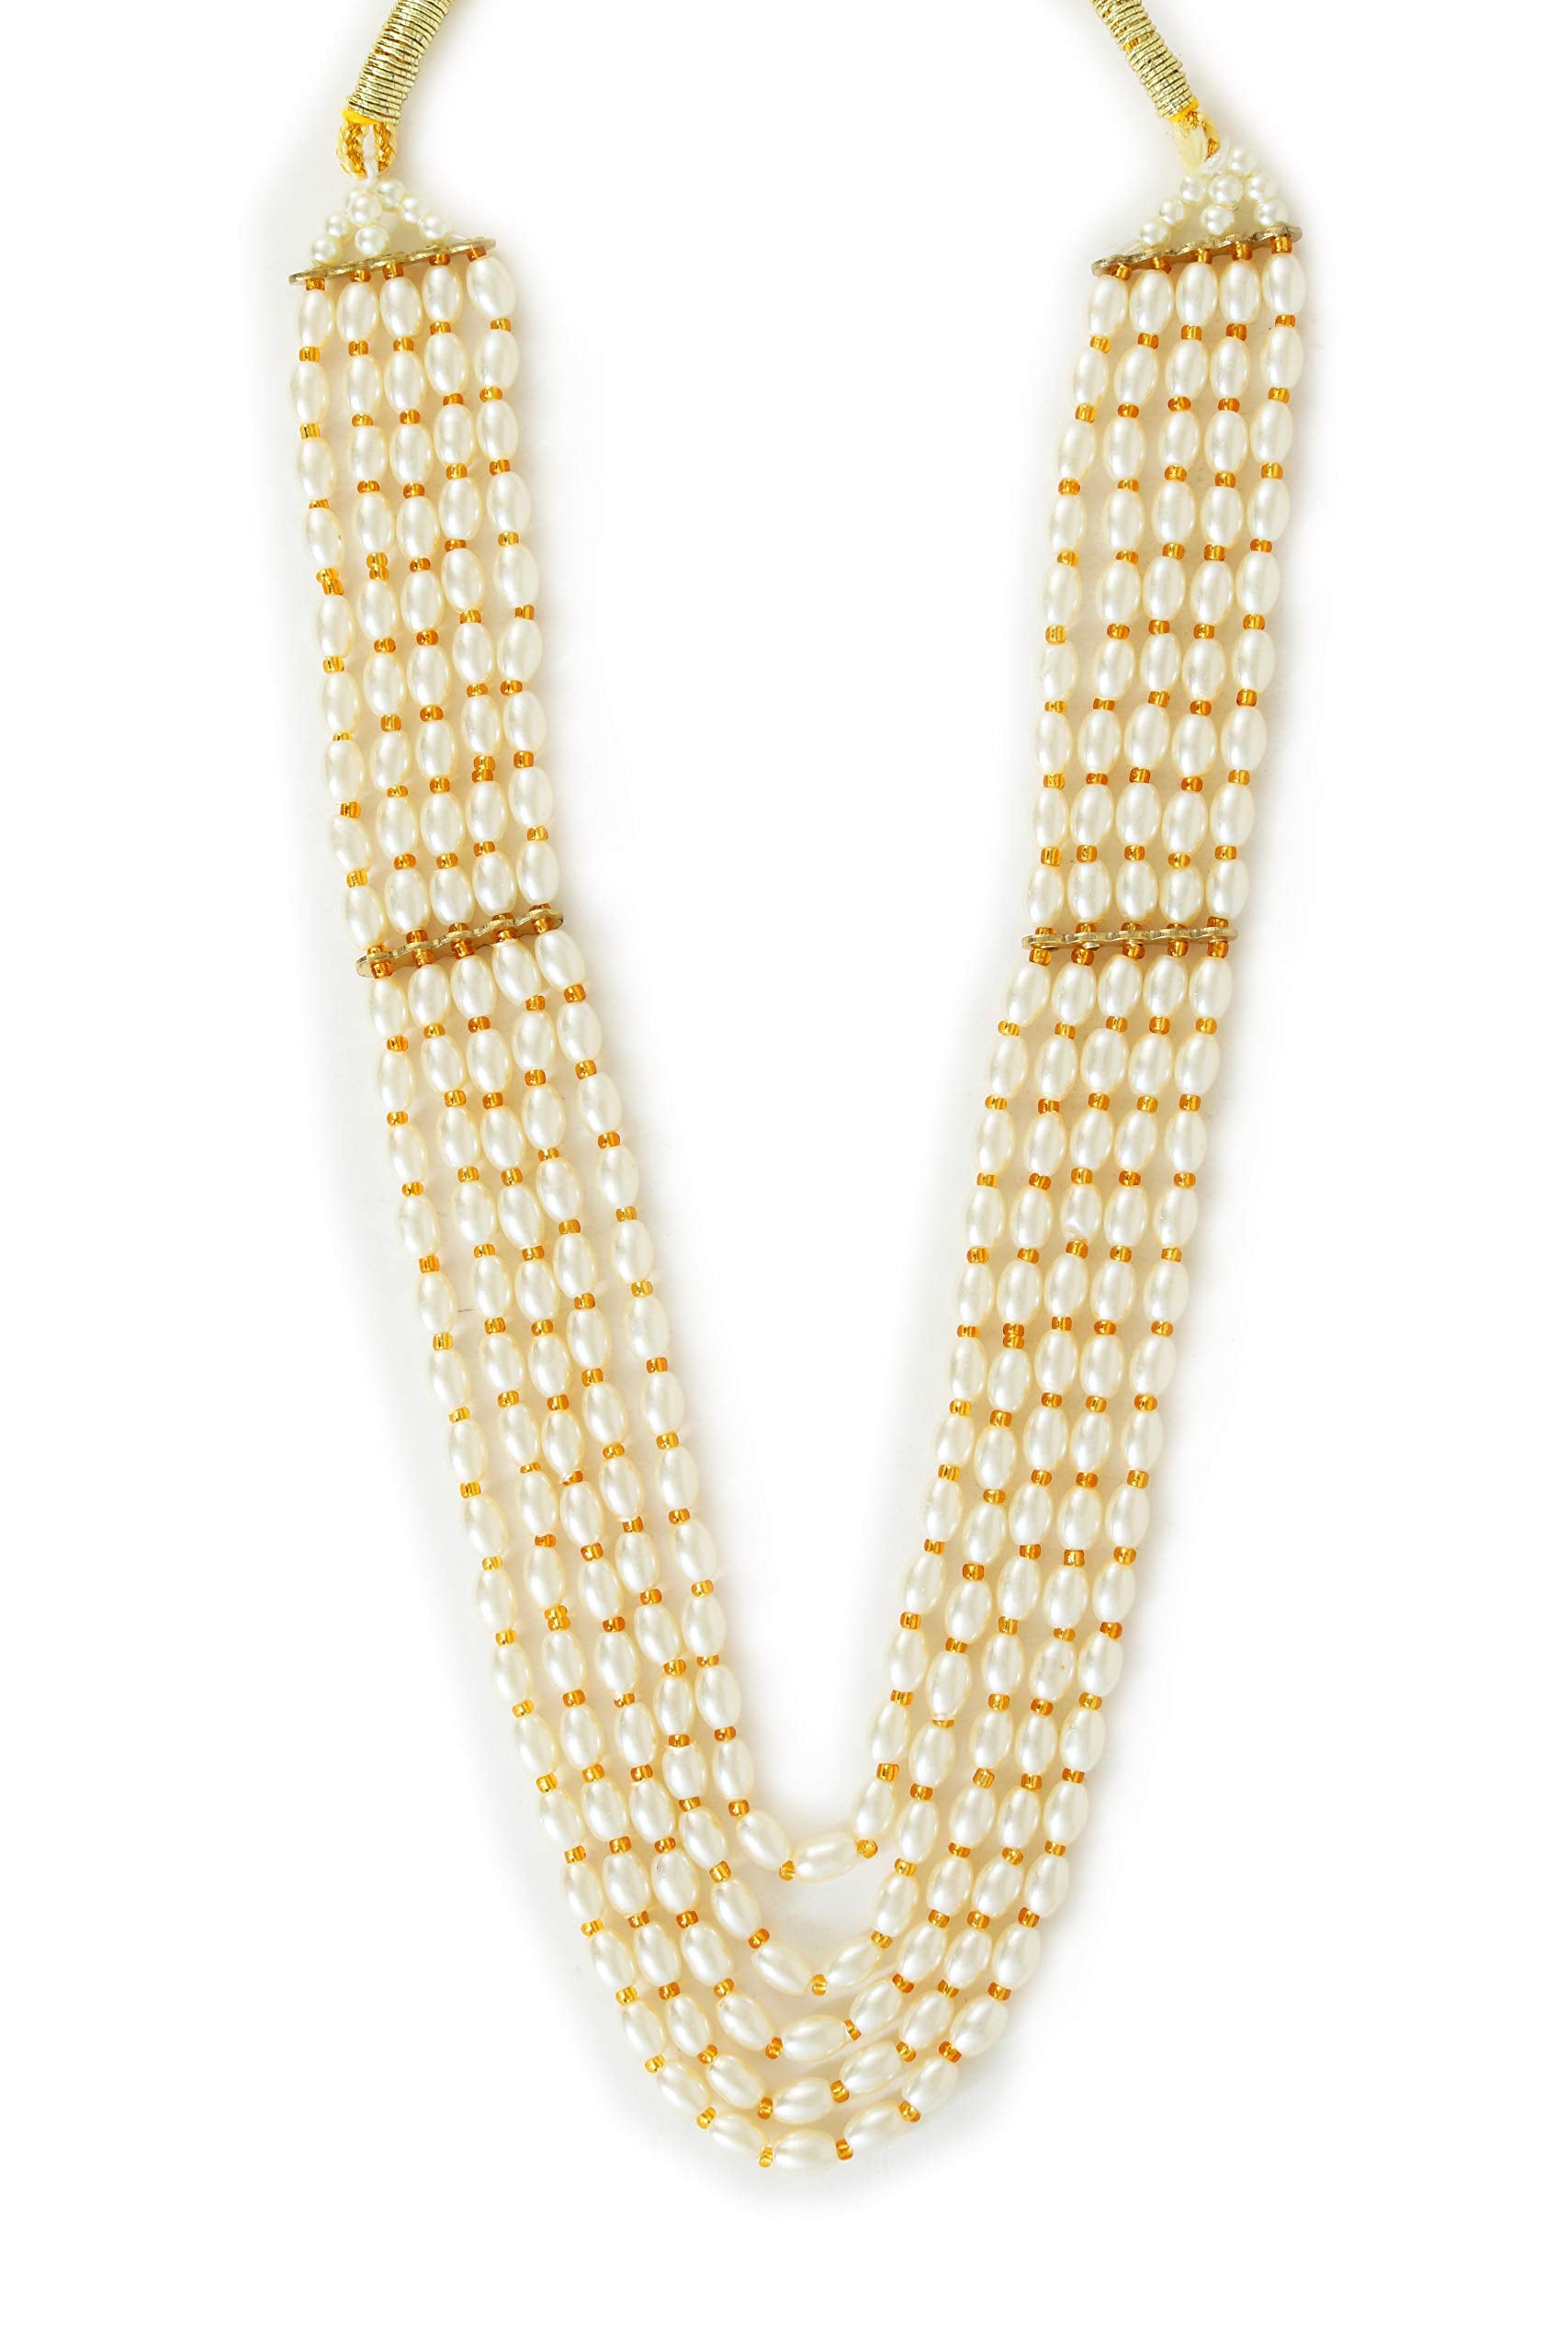 Yellow Chimes Ethnic Fashion Gold Plated Handmade Moti Long Multilayer Pearl stylish Jewellery Necklace For Women & Girls